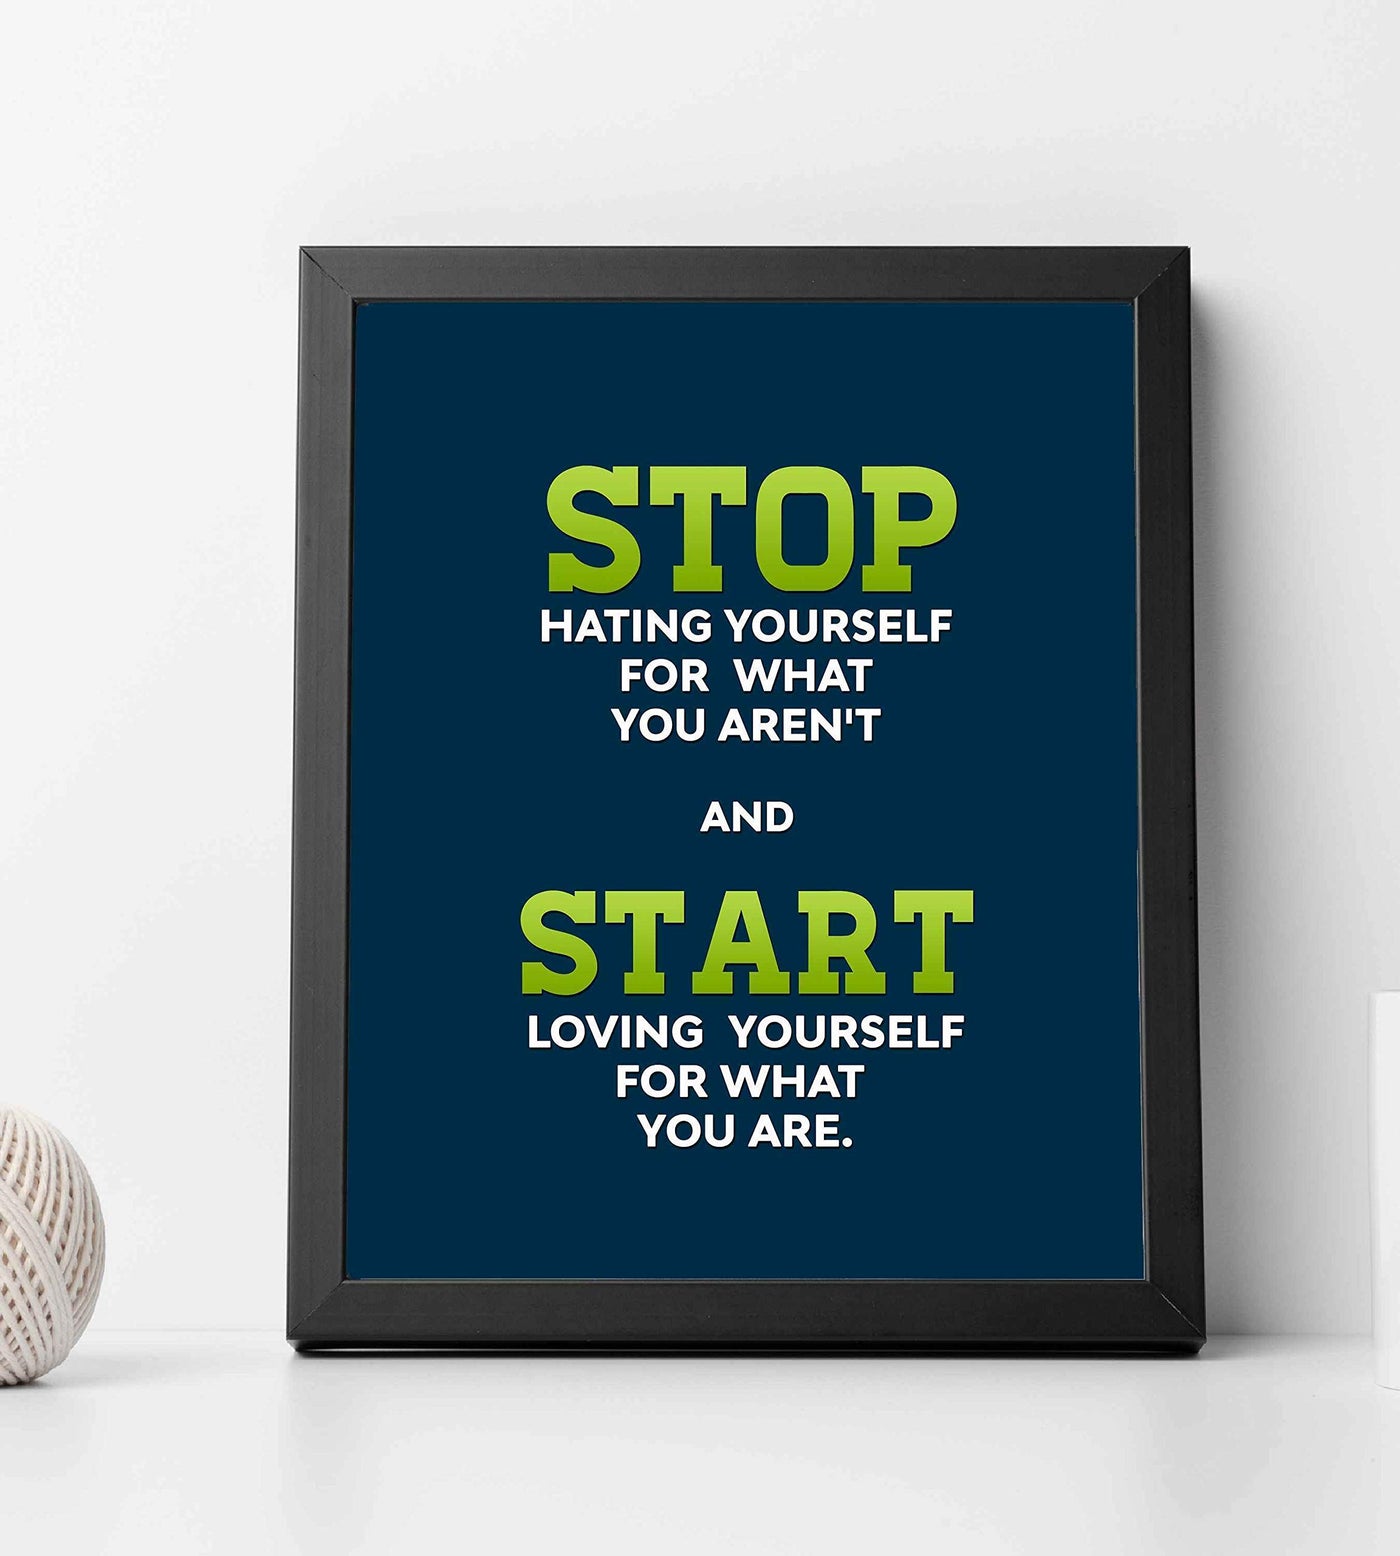 Start Loving Yourself For What You Are Life Quotes Wall Art -8 x 10" Inspirational Poster Print-Ready to Frame. Perfect Home-Office-Dorm-Teen Decor. Great Positive Gift & Reminder to Love Yourself!